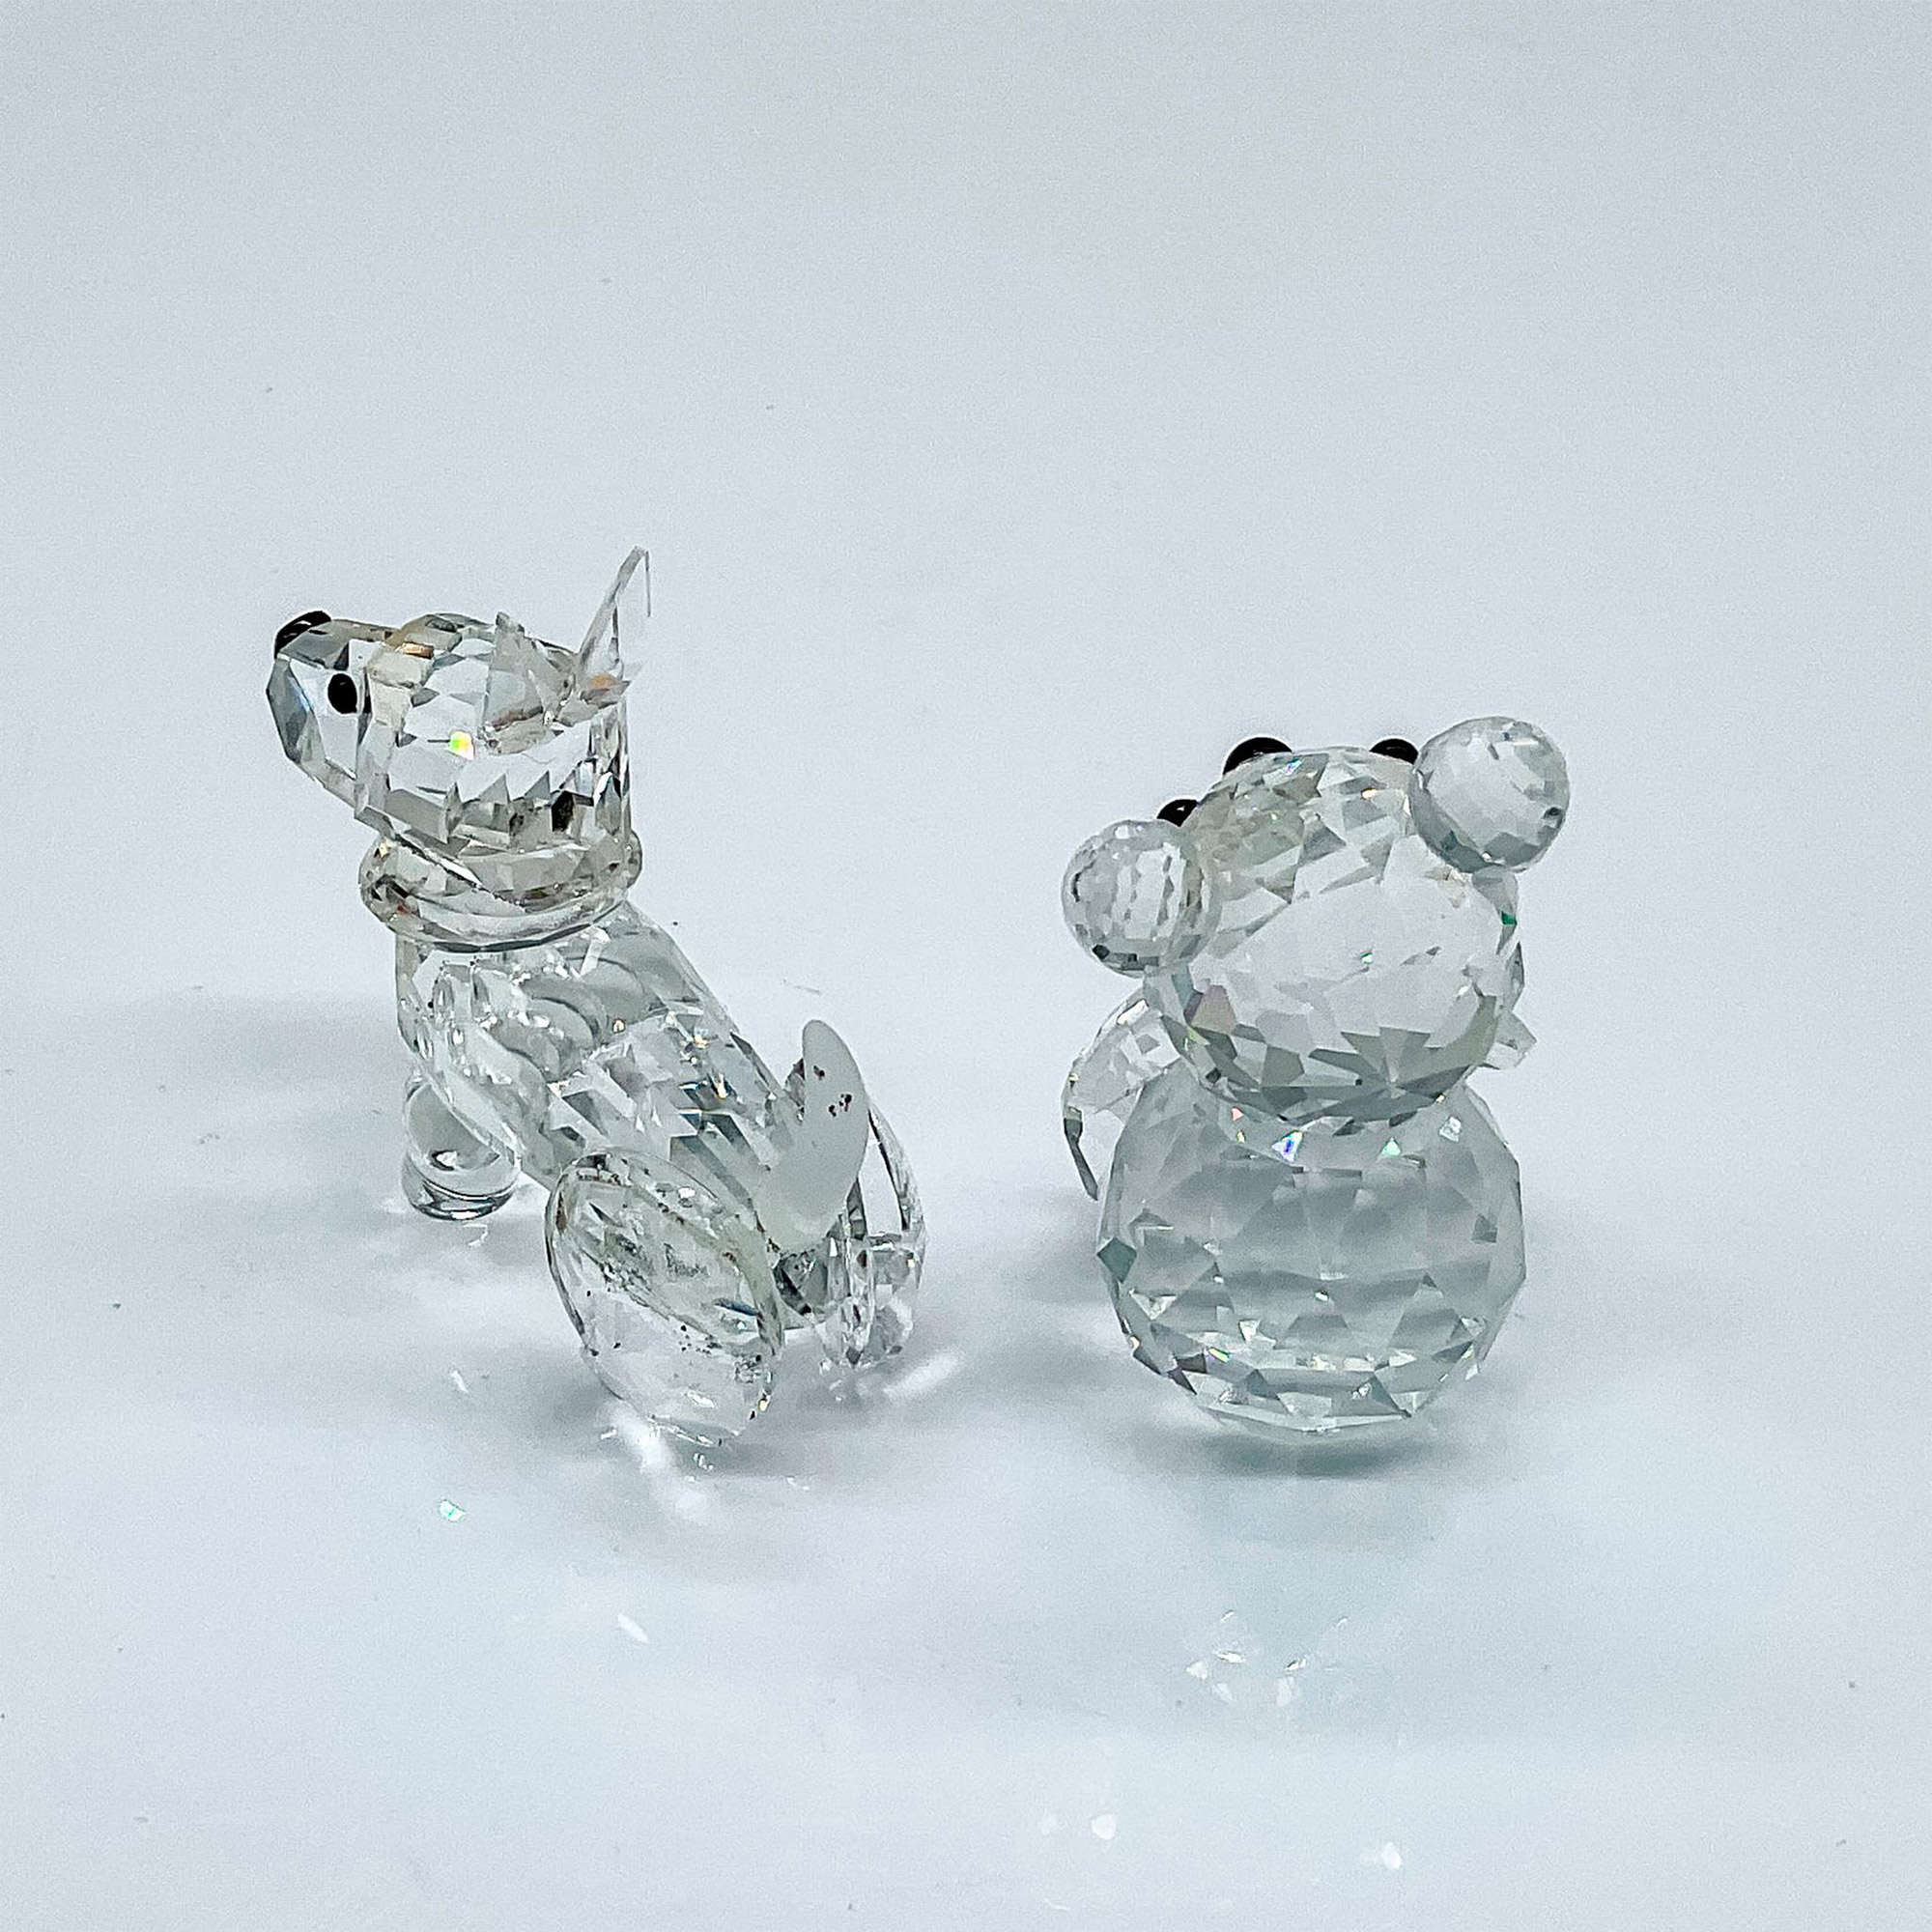 2pc Swarovski Silver Crystal Figurines, Bear and Terrier - Image 2 of 4